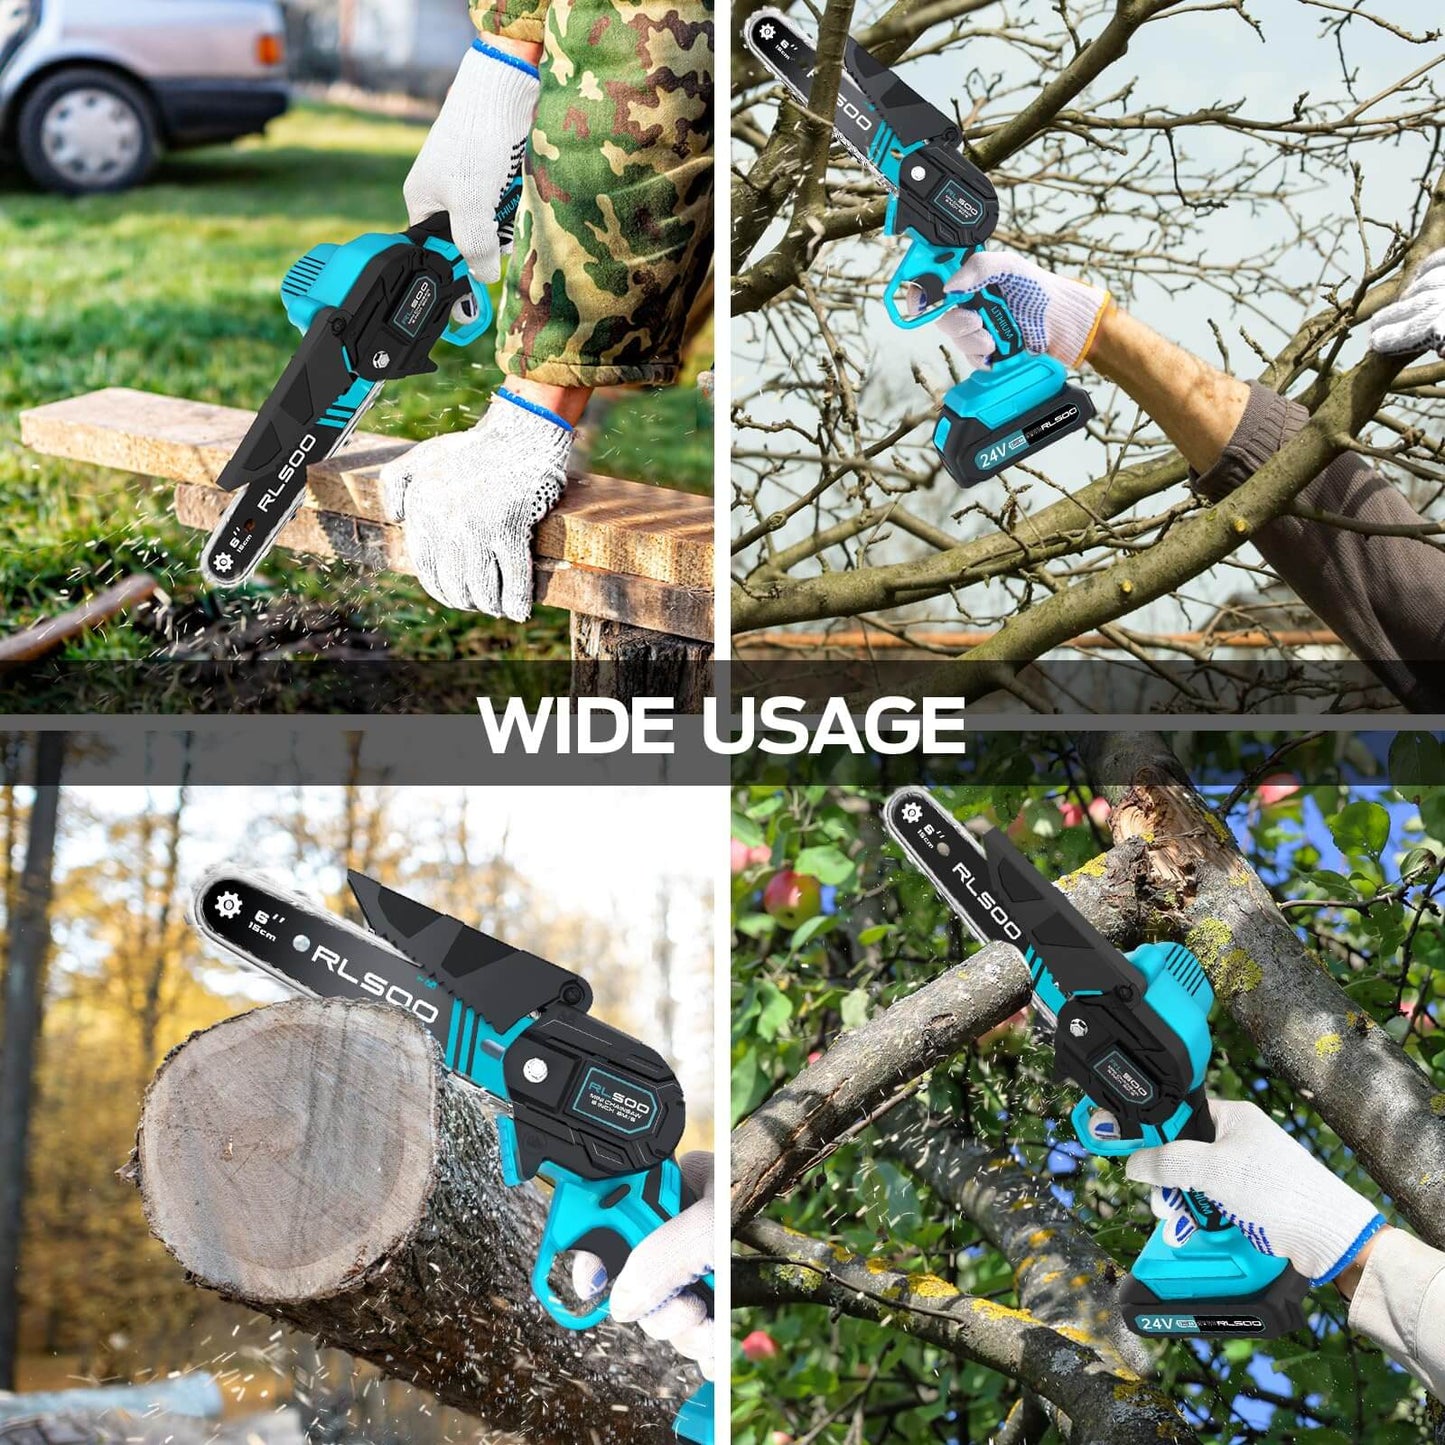 RLSOO 6-Inch Mini Electric Chainsaw - Cordless, Portable, Lightweight, High-Capacity Battery, Ideal for Wood Cutting, Pruning, and Outdoor Use